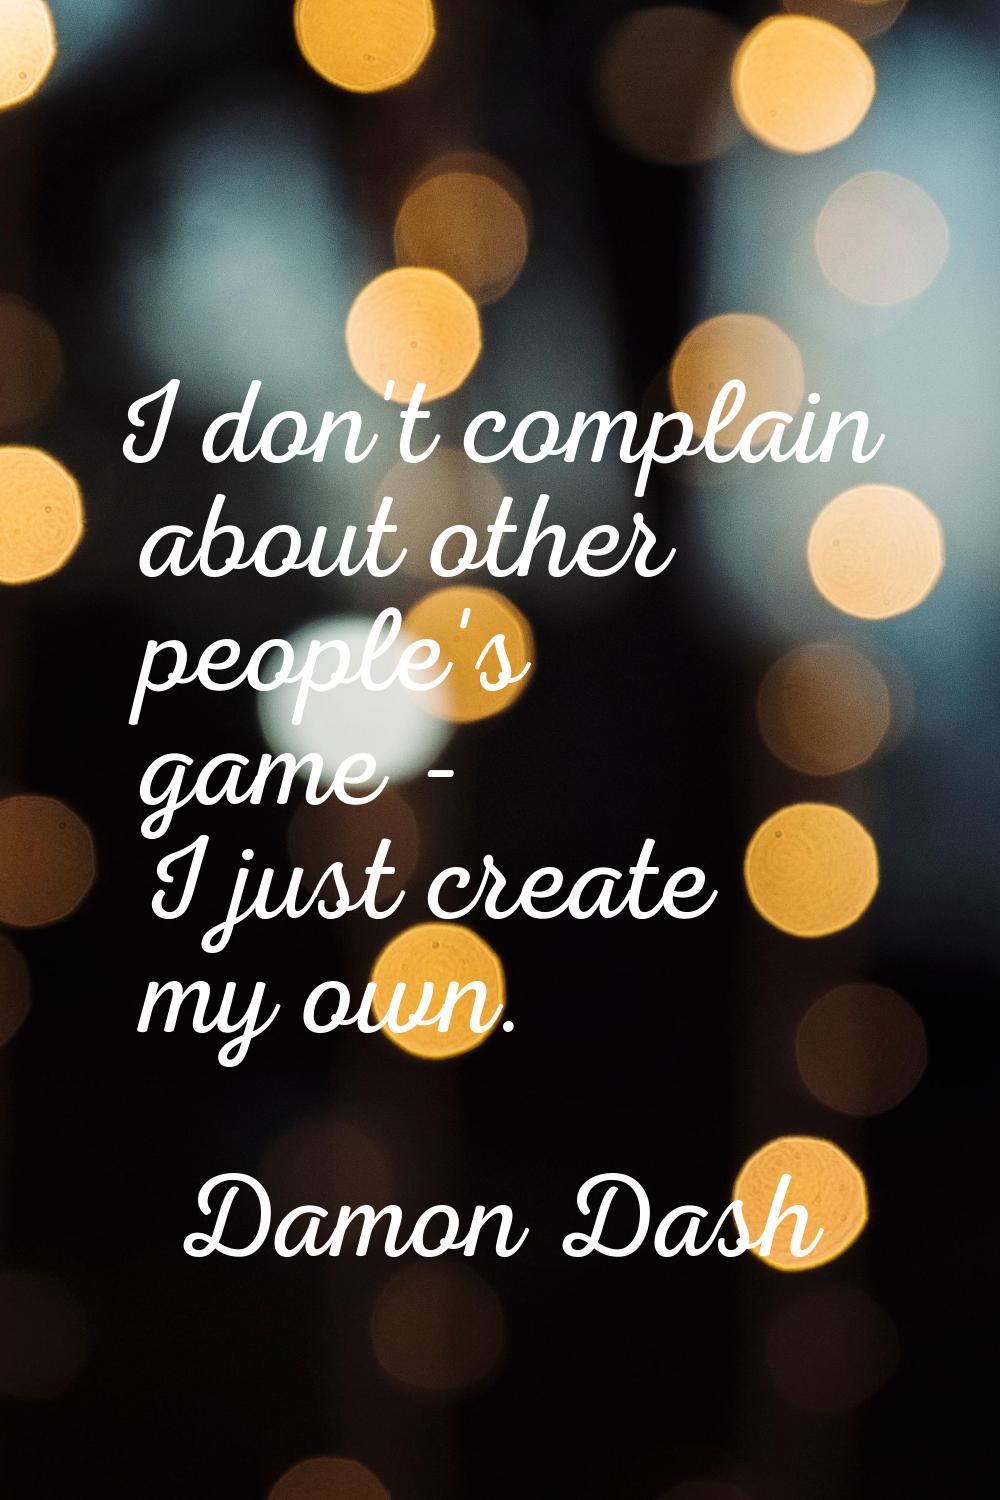 I don't complain about other people's game - I just create my own.